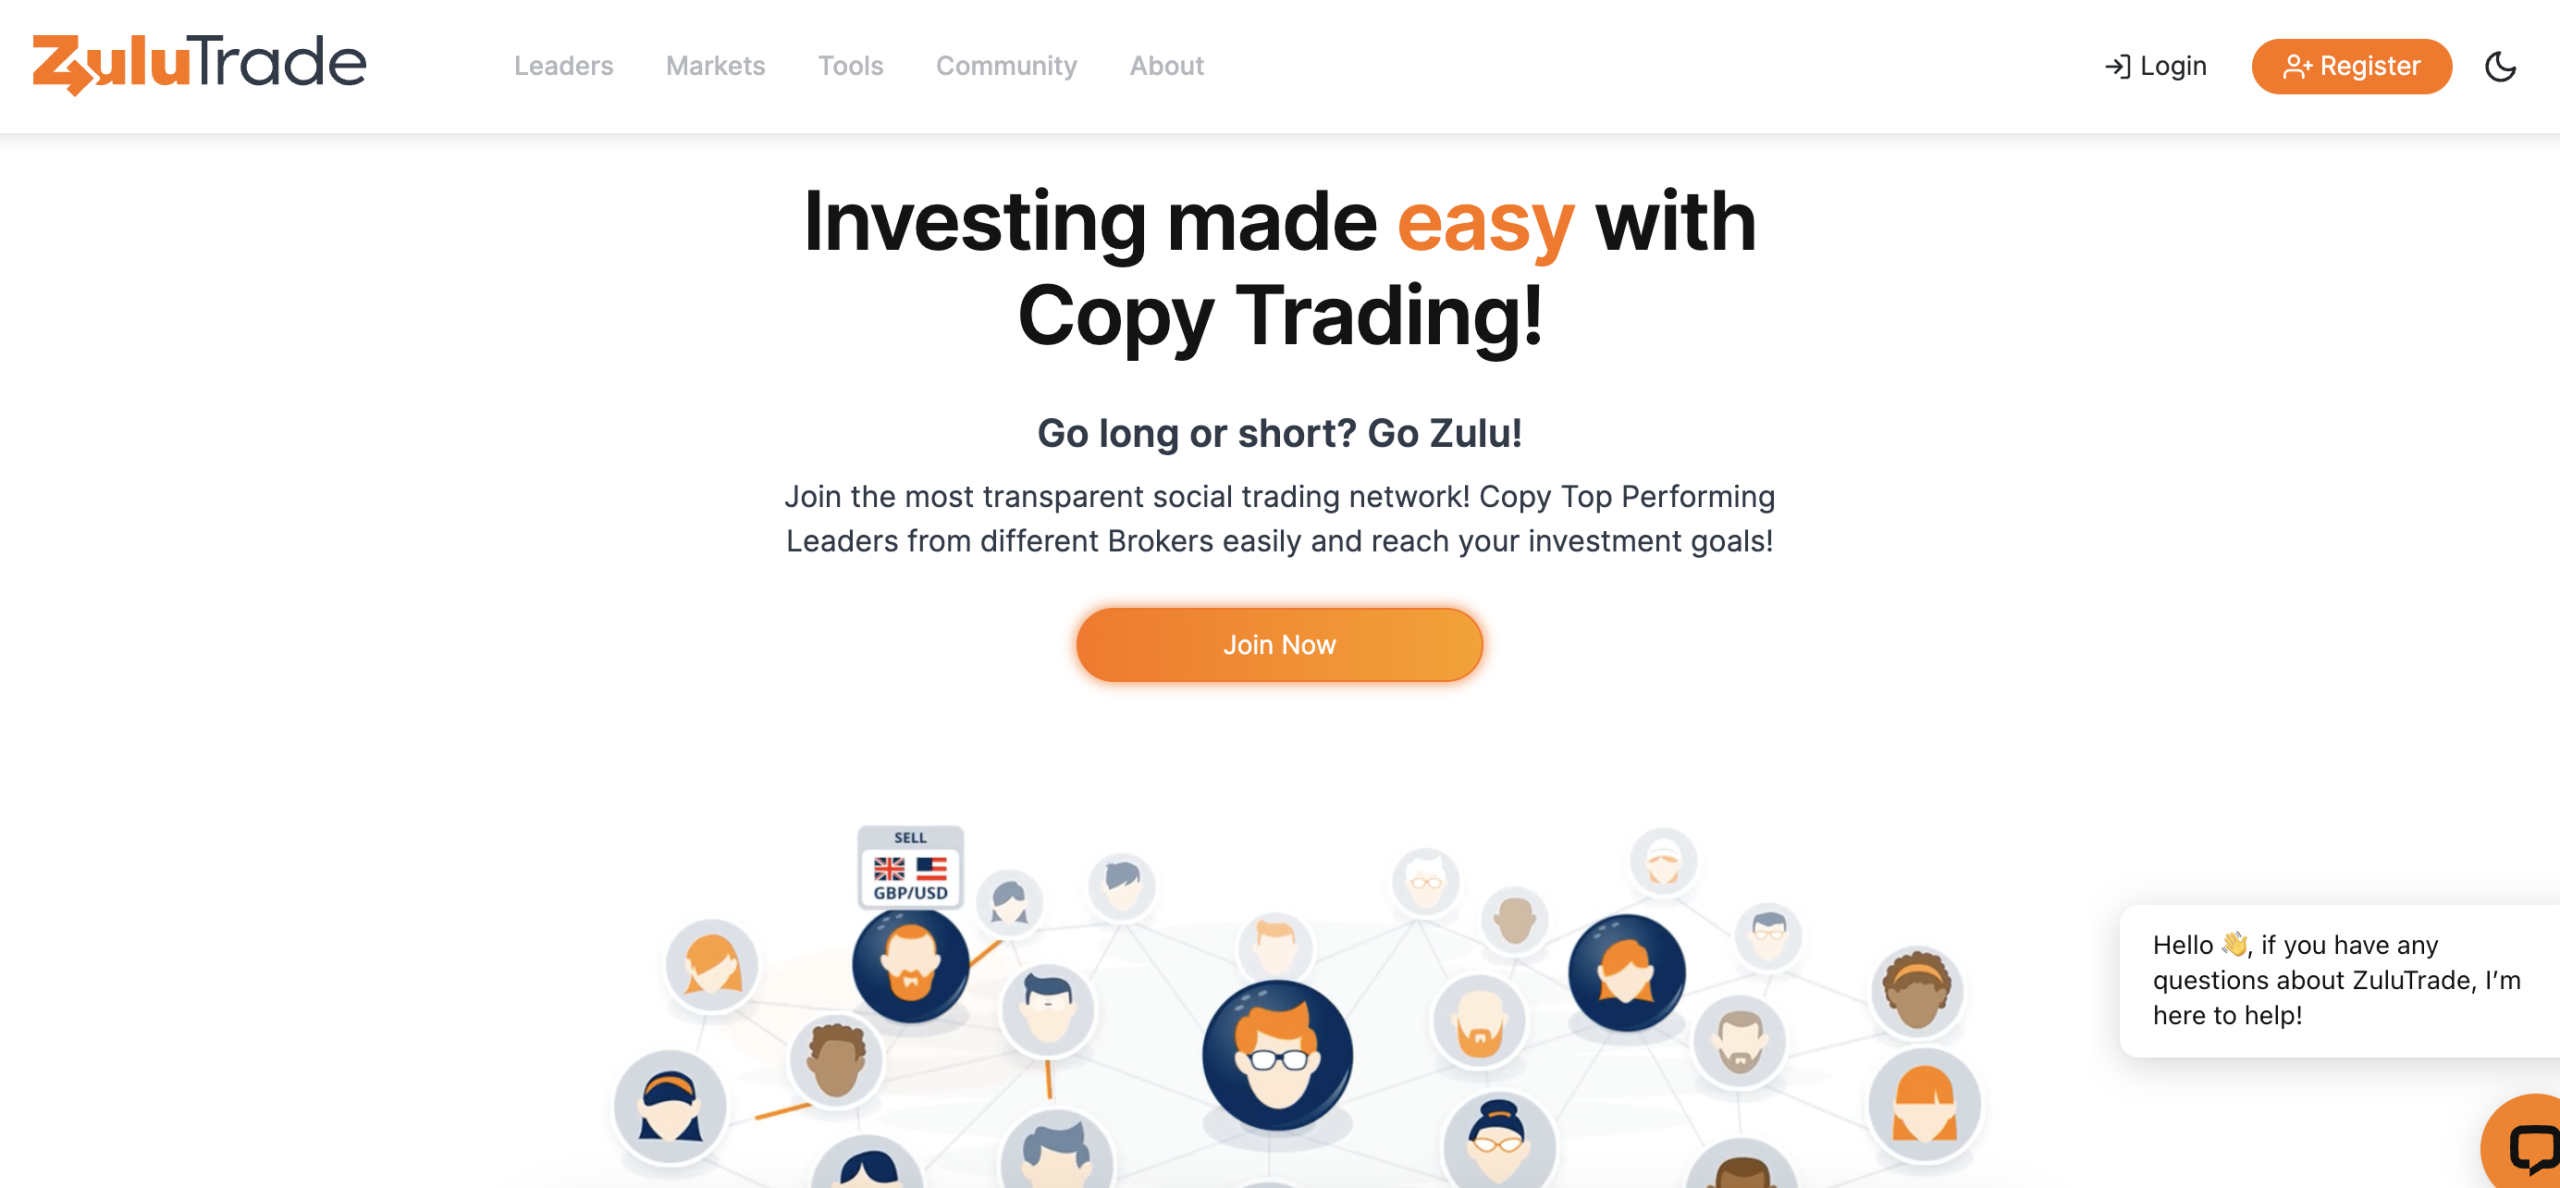 Zulutrade copy trading review 